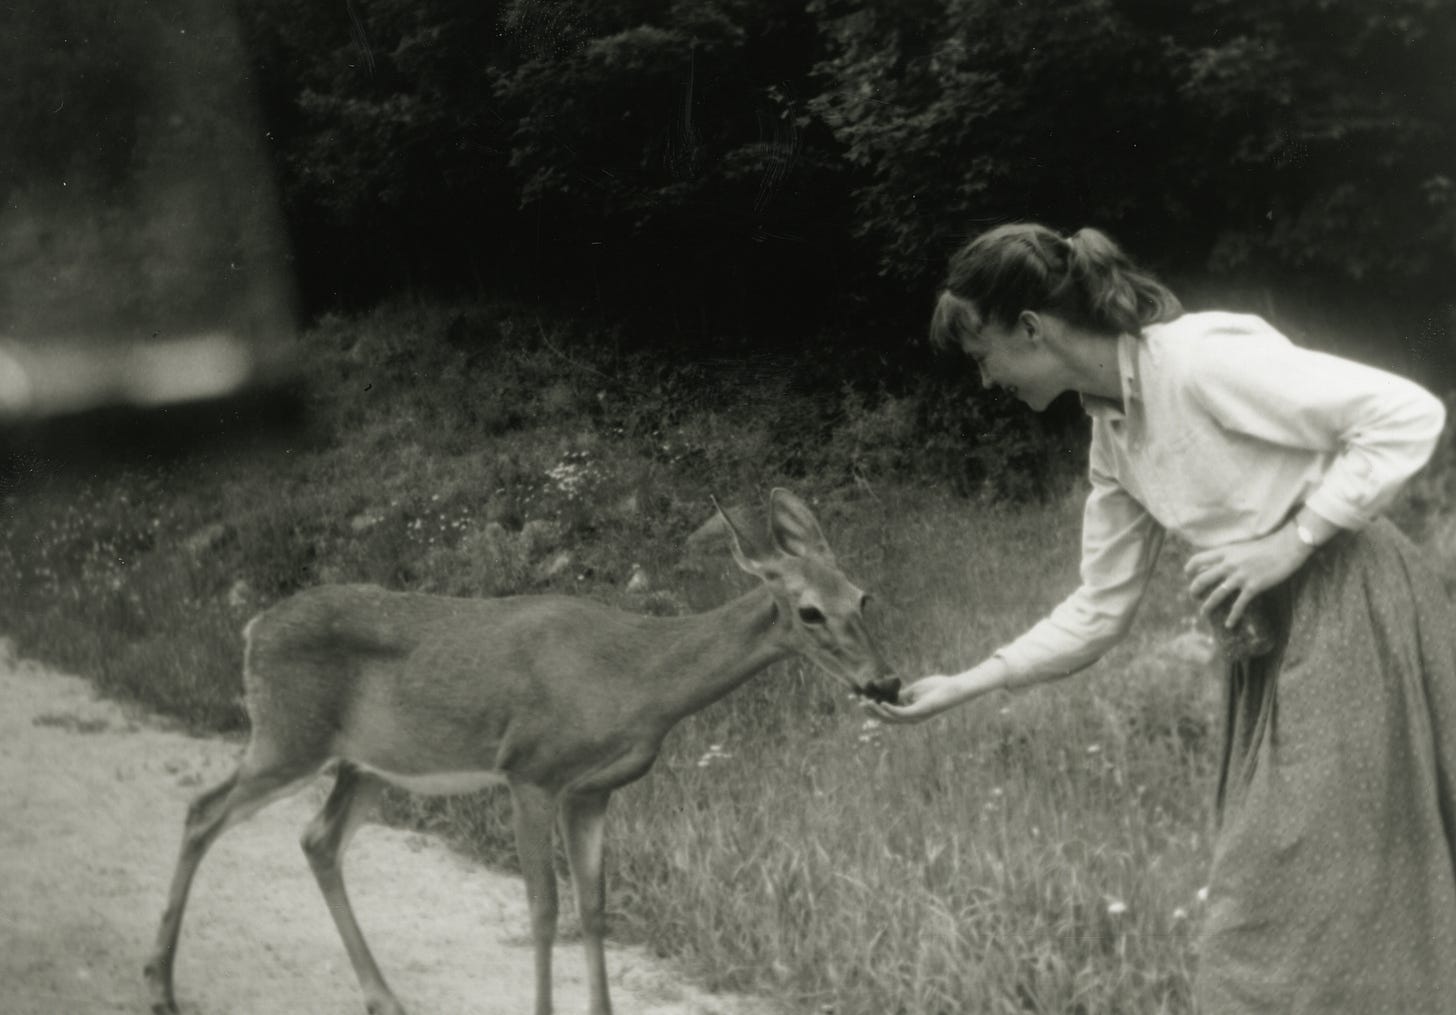 Peter K Steinberg on Twitter: "Sylvia Plath fed a Canadian deer  blueberries. Would you? https://t.co/q7VDJB6qVs" / Twitter